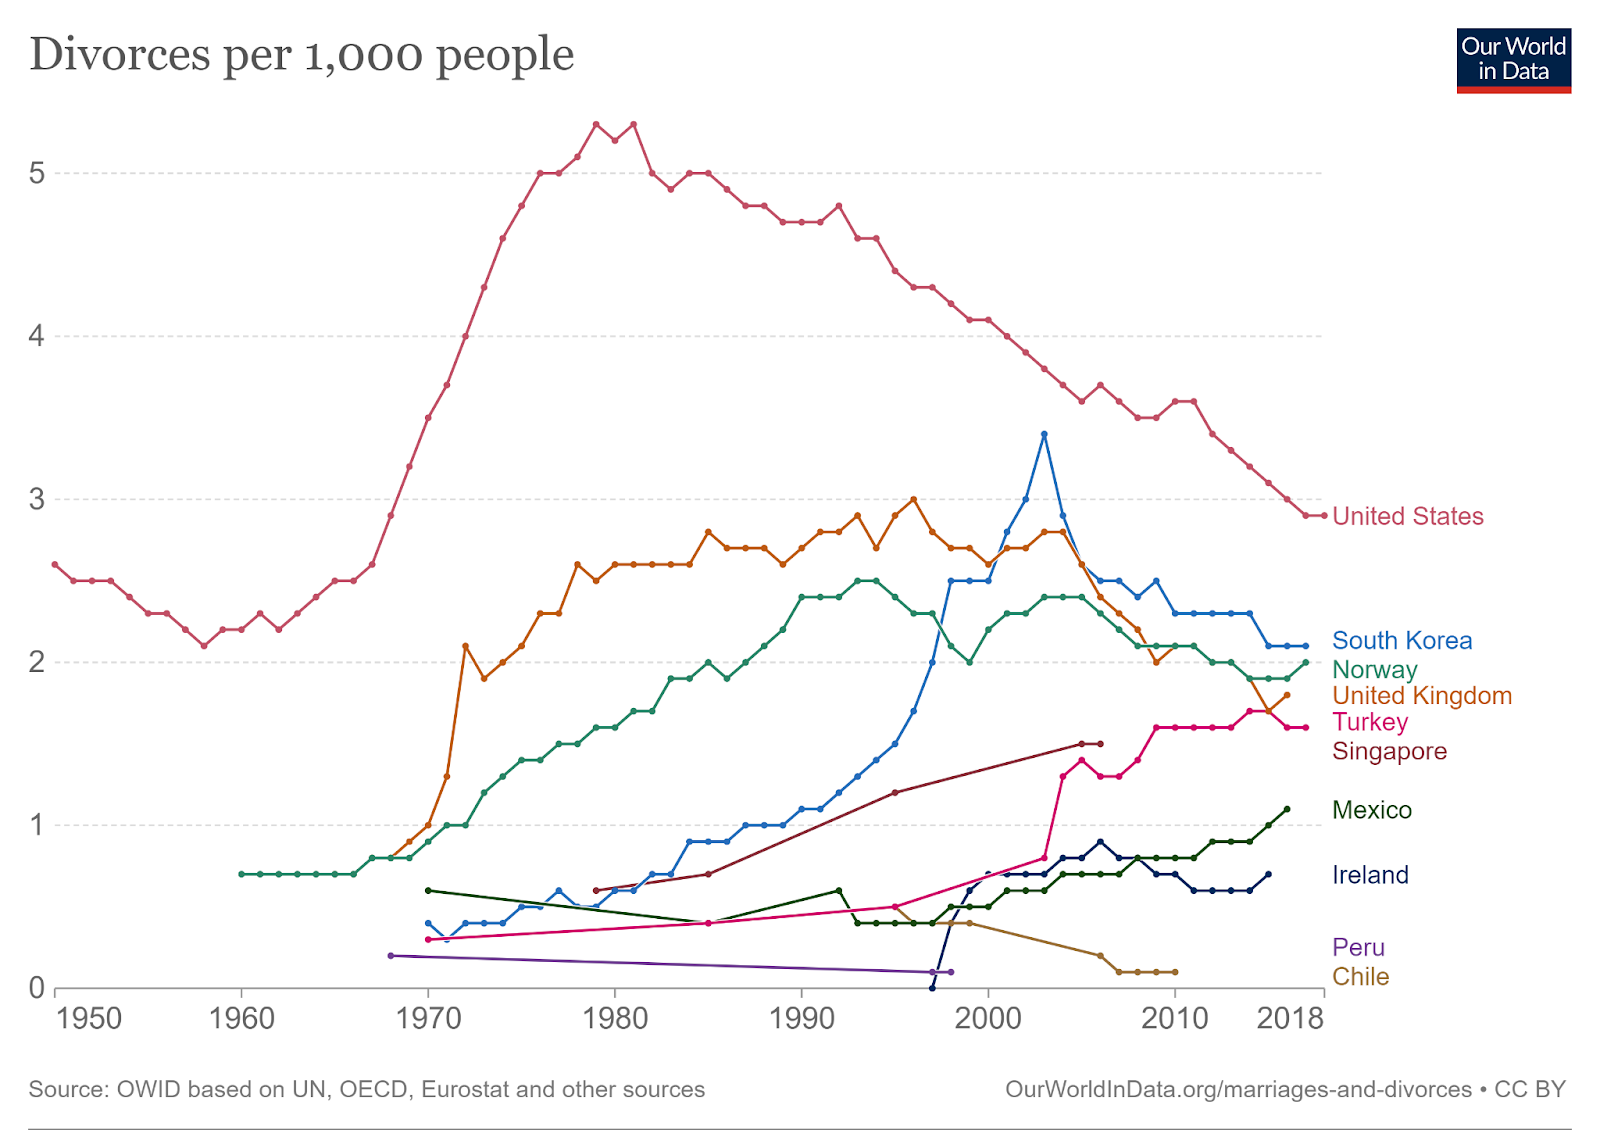 External image of a graph showing “Divorces per 1000 people”. The Y-axis shows the amount of people, 1-5. The X-axis shows the years from 1950 to 2018. The statistics shows: The United States’ graph started at 2.6 people, declined from 1950 to 1957, then it increased up to 5.3 people in the year 1980, the numbers had an almost constant decline between the years of 1980 to 2018, ending up at 2.9 people. South Korea's graph started in 1970 where they were close to 0 people, it then increased drastically between 1970 to 2004 reaching 3.5 people, it declined for the rest of the graph ending at 2.1 people. Norway’s graph started in 1960 at 0.7 people, it increased up to 2.5 people in 1993, the numbers declined slightly during the rest of the time, ending at 2 people. The United Kingdom’s graph began in 1968 at 0.8 people. They then increased, reaching 3 people in 1997, it declined during the rest of the time, ending at 1.8 people. Turkey’s graph began in 1970, it had an almost constant increase during the entire time, ending in 1.6 people. Singapore’s graph began in 1979 and had a constant increase, reaching 1.5 people in 2006, where the graph ended. Mexico’s graph stayed fairly constant the entire time, it began in 1970 at 0.6 people and ended in 2018 at 1.1 people. Ireland’s graph began in 1997 at 0, it had a drastic increase during the next 9 years, reaching 0.9 people. After that, it declined for the rest of the time, reaching 0.7 people. Peru”s graph began in 1968 and ended in 1998, the numbers had a constant decline, going from 0.2 people to 0.1 people. Chile’s graph began at 0.4 people in 1995, it declined down to 0.1 people in 2010, where it ended. The source for this data is: OWID based on UN, OECD, Eurostat and other sources. OurWorldInData.org/mariages-and-divorce, CC BY.